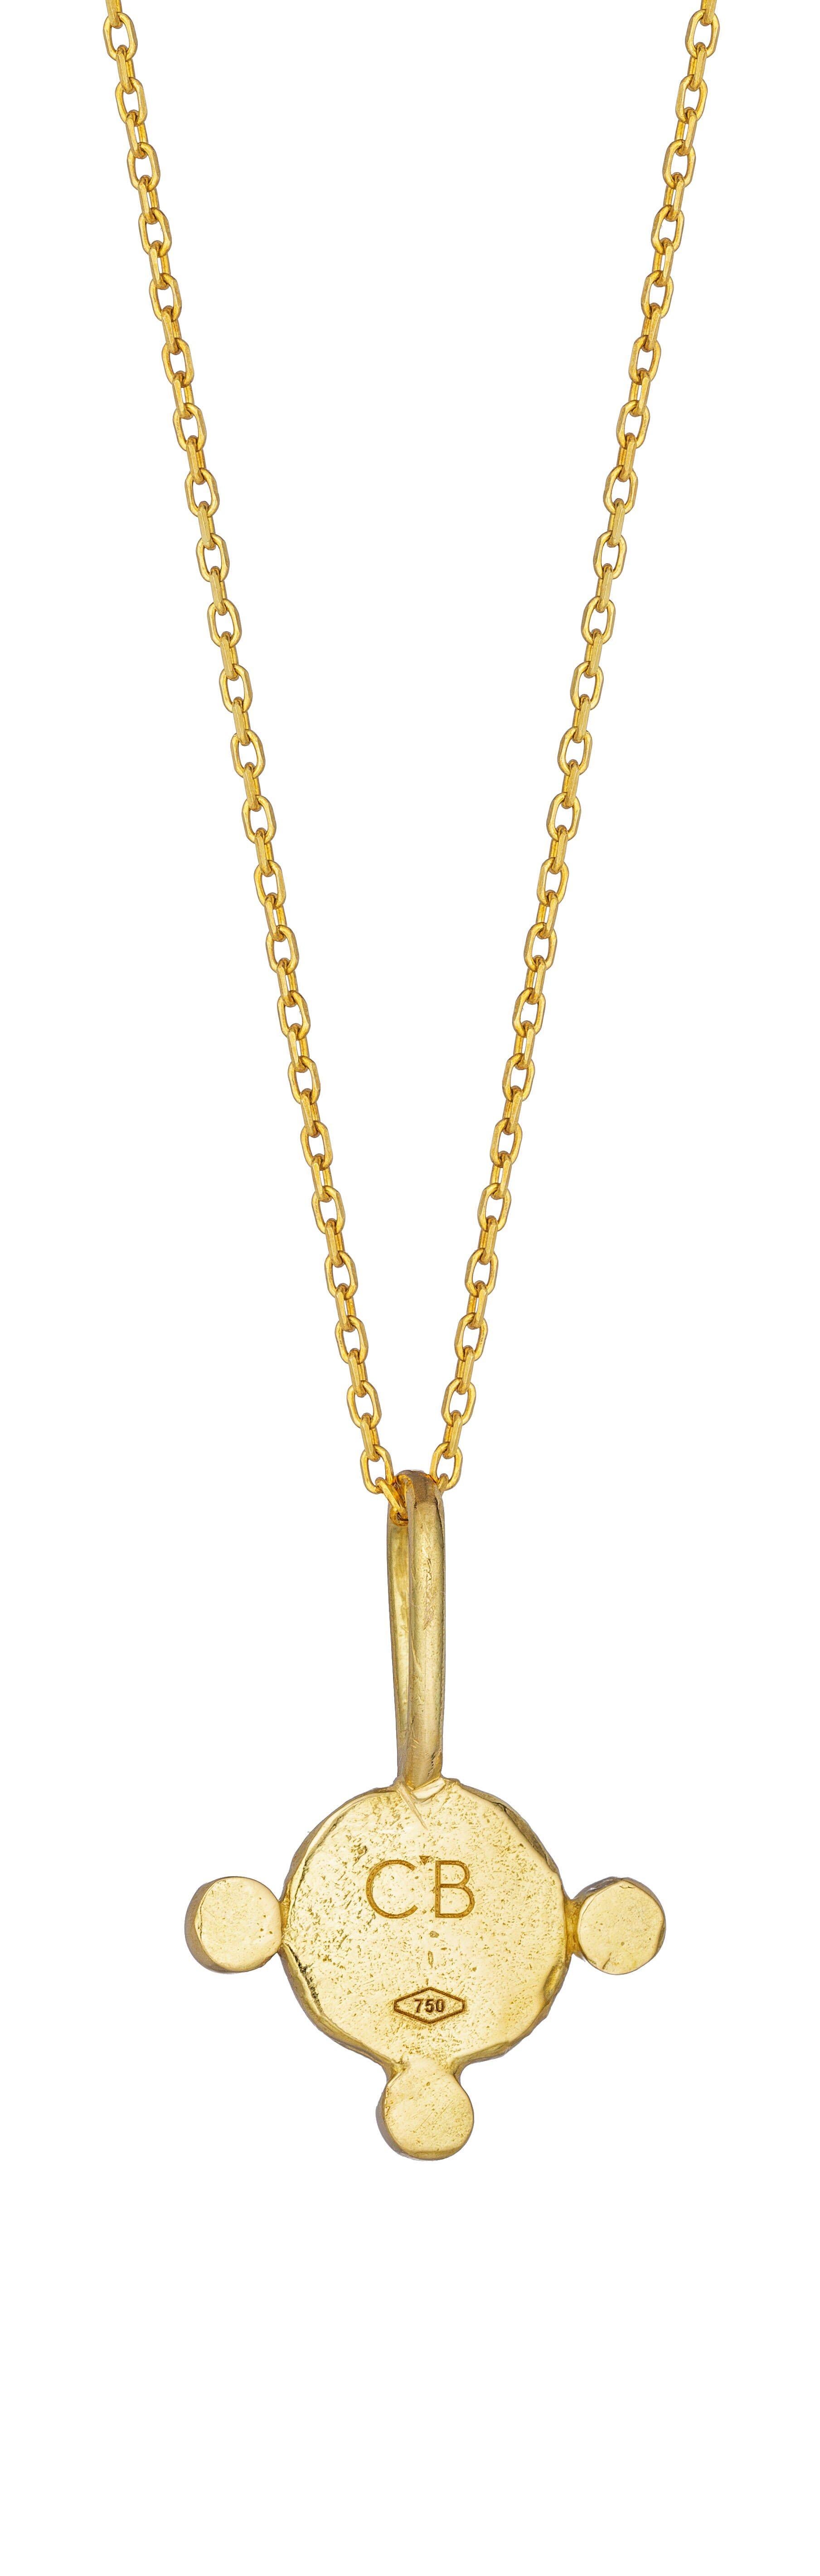 January Birthstone Pendant Necklace with Rainbow Garnet, 18 Karat Yellow Gold
Handcrafted and individually cast in 18-karat solid yellow gold. Olivia carves each piece from wax, making these pendants unique, which we believe is what gives them their